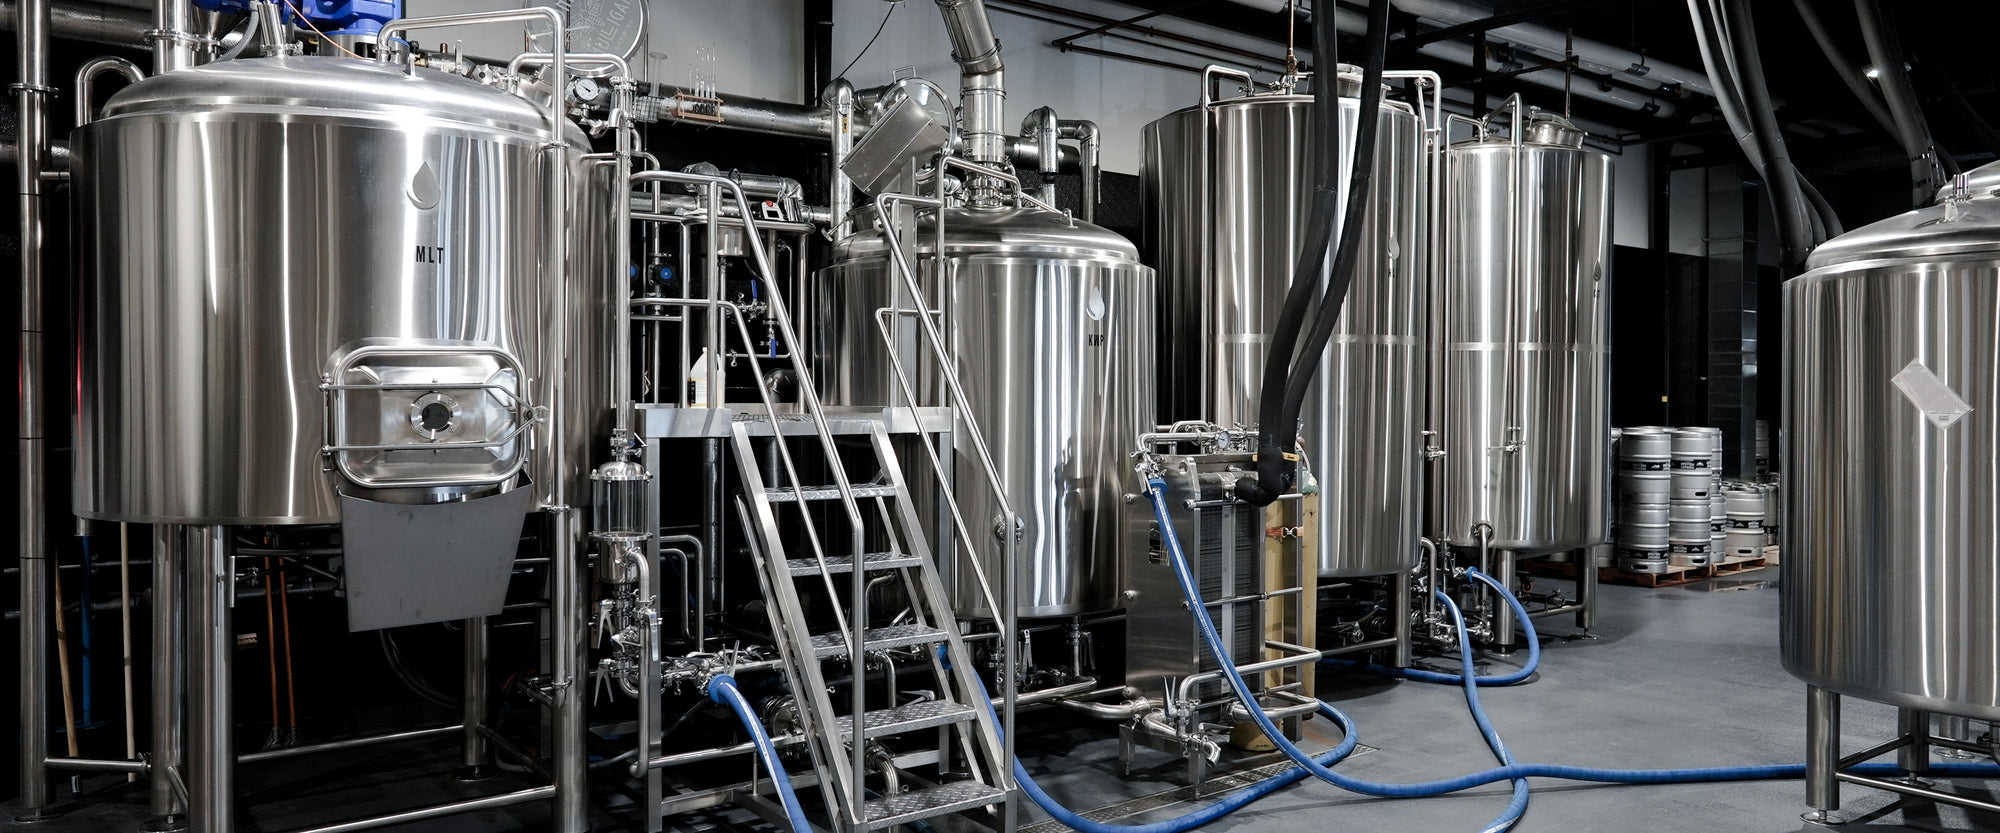 Midnight Mulligan Brewery showcasing 1.5" tri-clamp butterfly valves, brewhouse parts, sanitary fittings, and an array of brewing accessories. Discover top-quality brewing parts and equipment for your craft beer production."